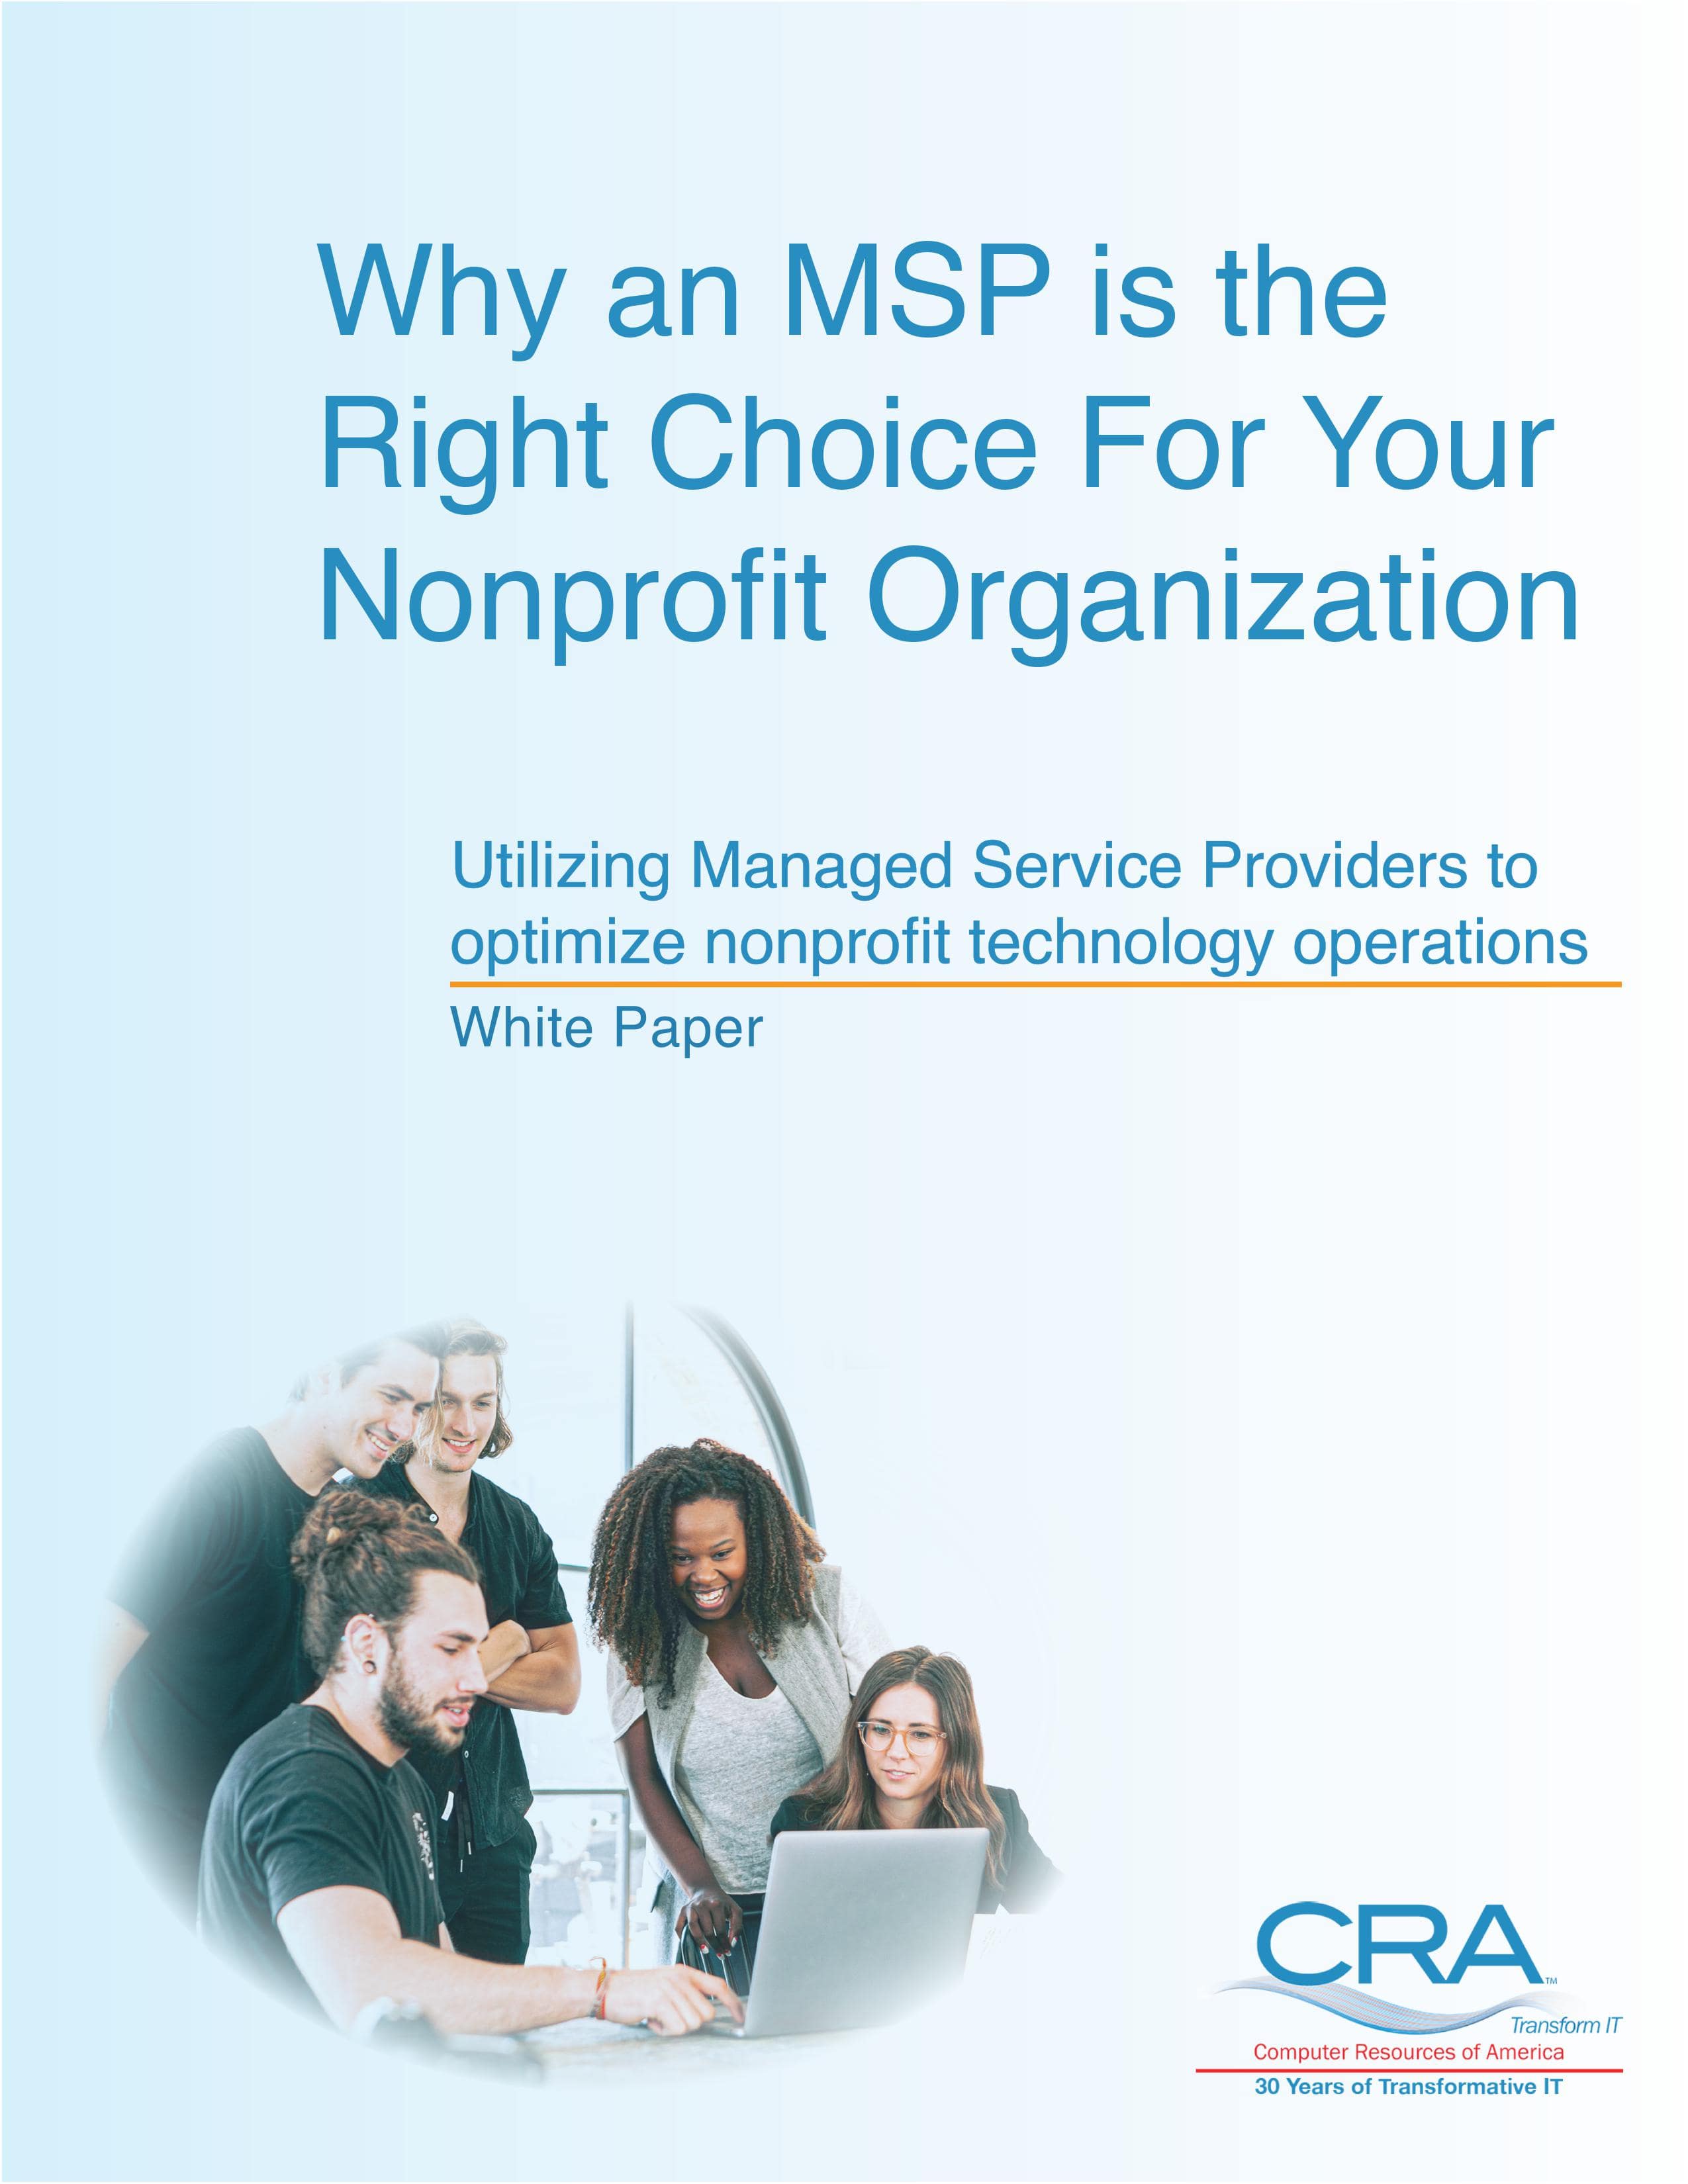 Why An MSP is The Right Choice For Your Nonprofit